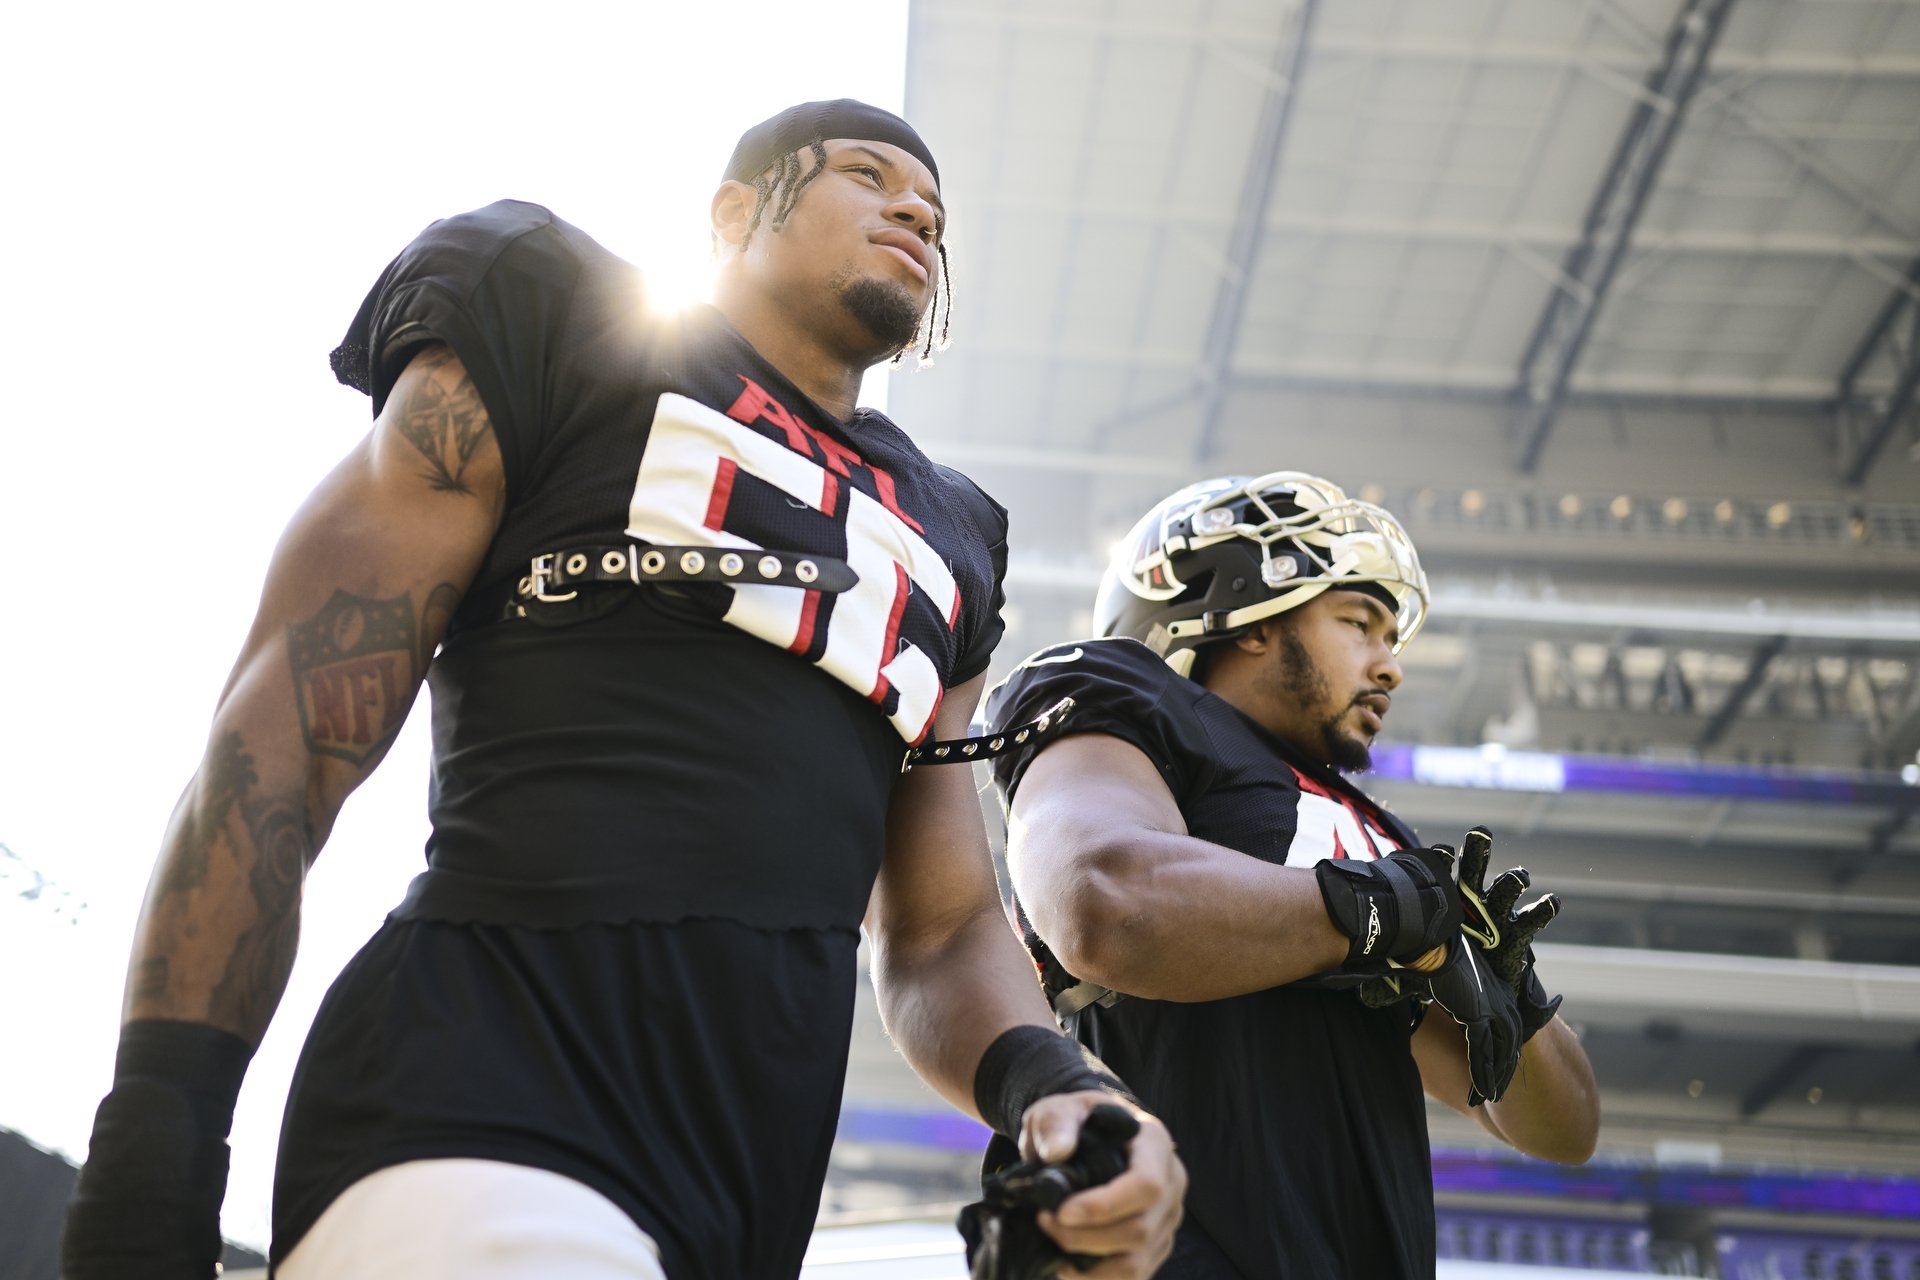  Atlanta Falcons outside linebacker Quinton Bell #56 and linebacker Jordan Brailford #49 during practice for the game against the Seattle Seahawks in Seattle, WA, on Wednesday, September 21, 2022. (Photo by Shanna Lockwood/Atlanta Falcons) 